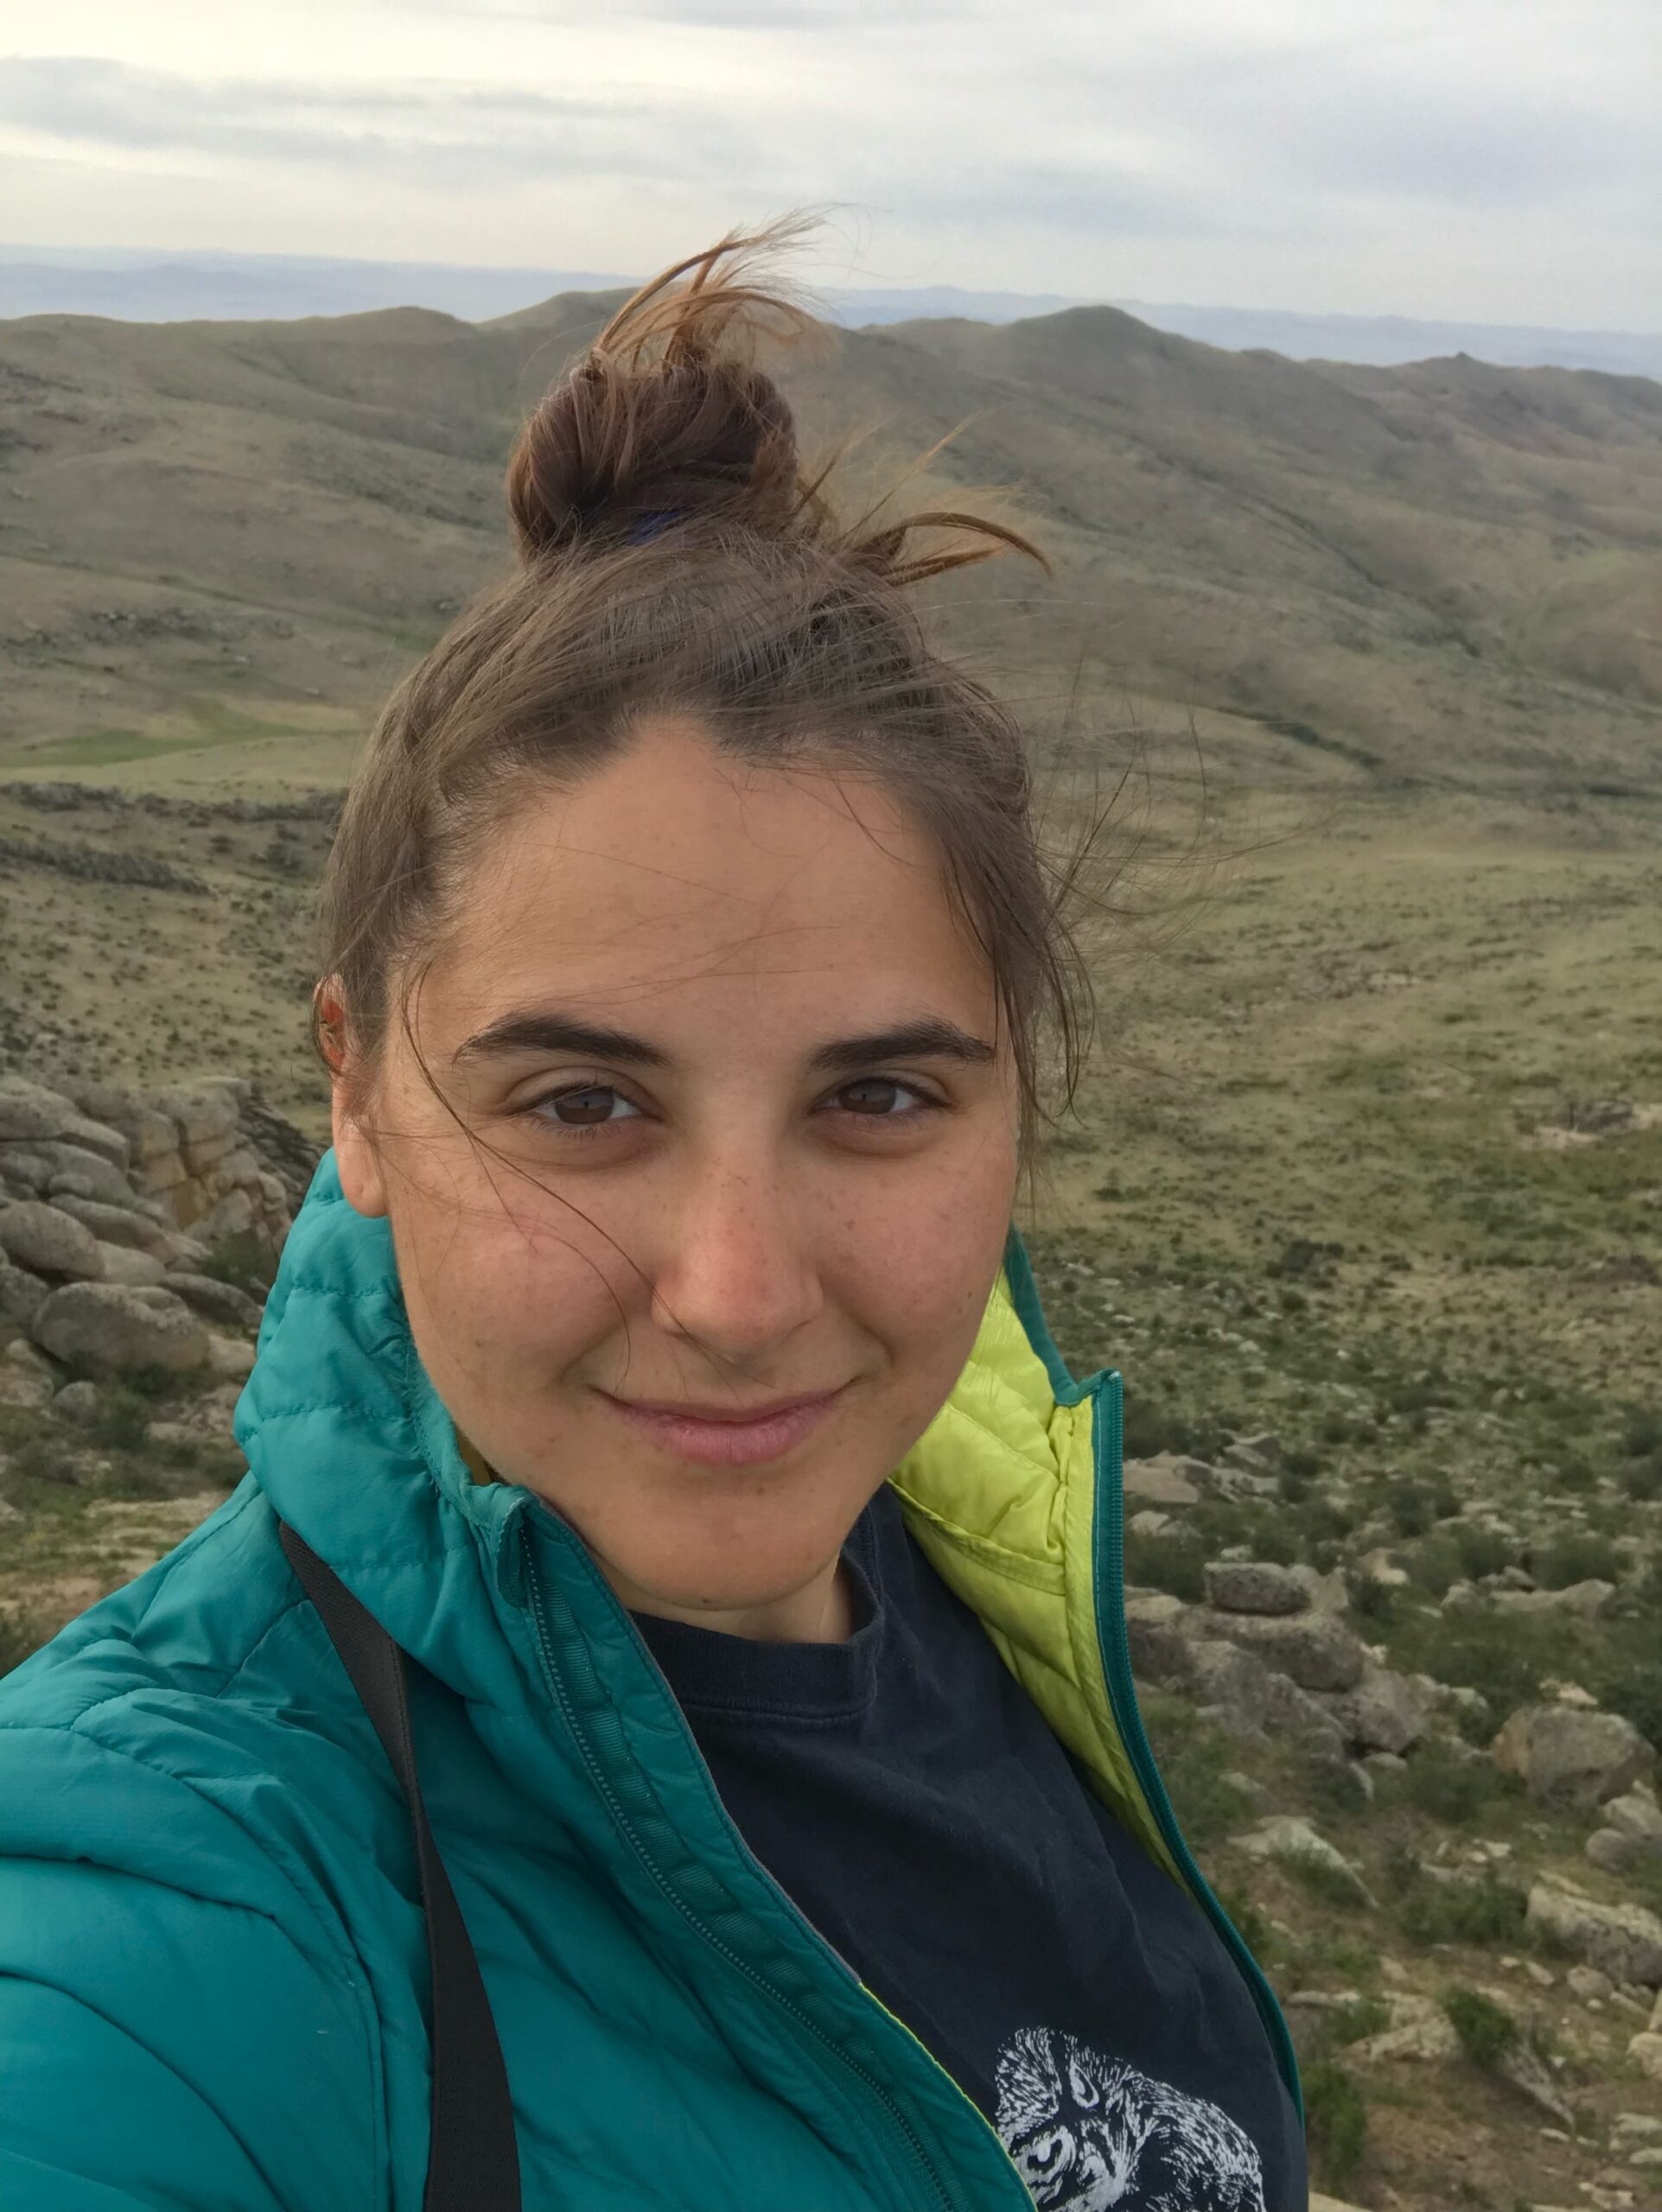 This image shows Christine in a rocky desert landscape, wearing a blue jacket and with her brown hair up in a bun and a soft smile on her face.